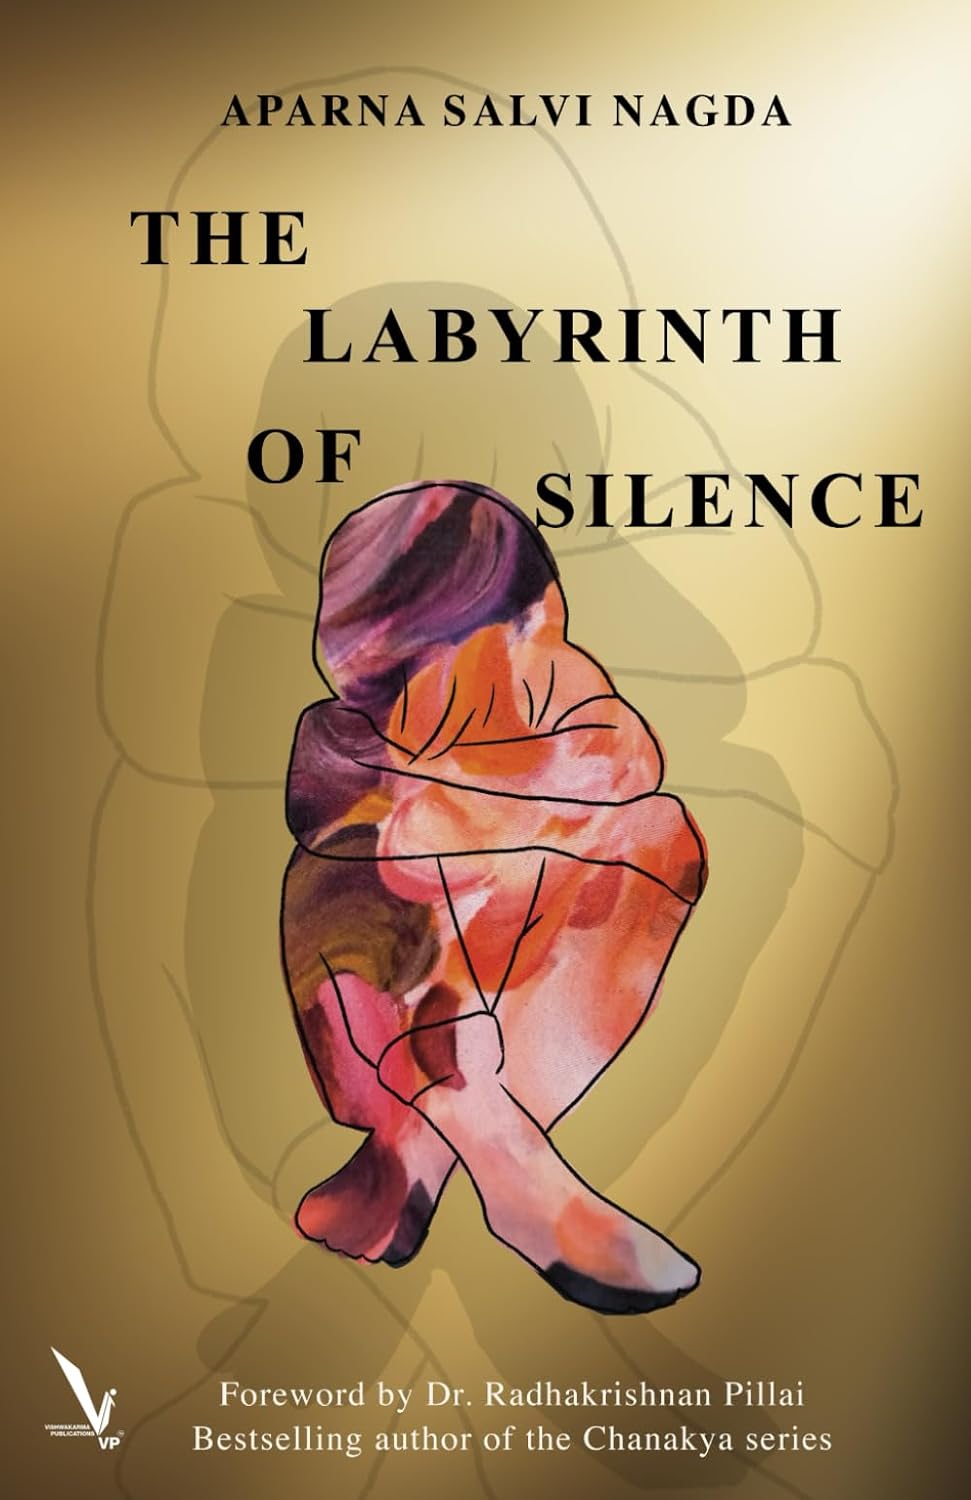 THE LABYRINTH OF SILENCE